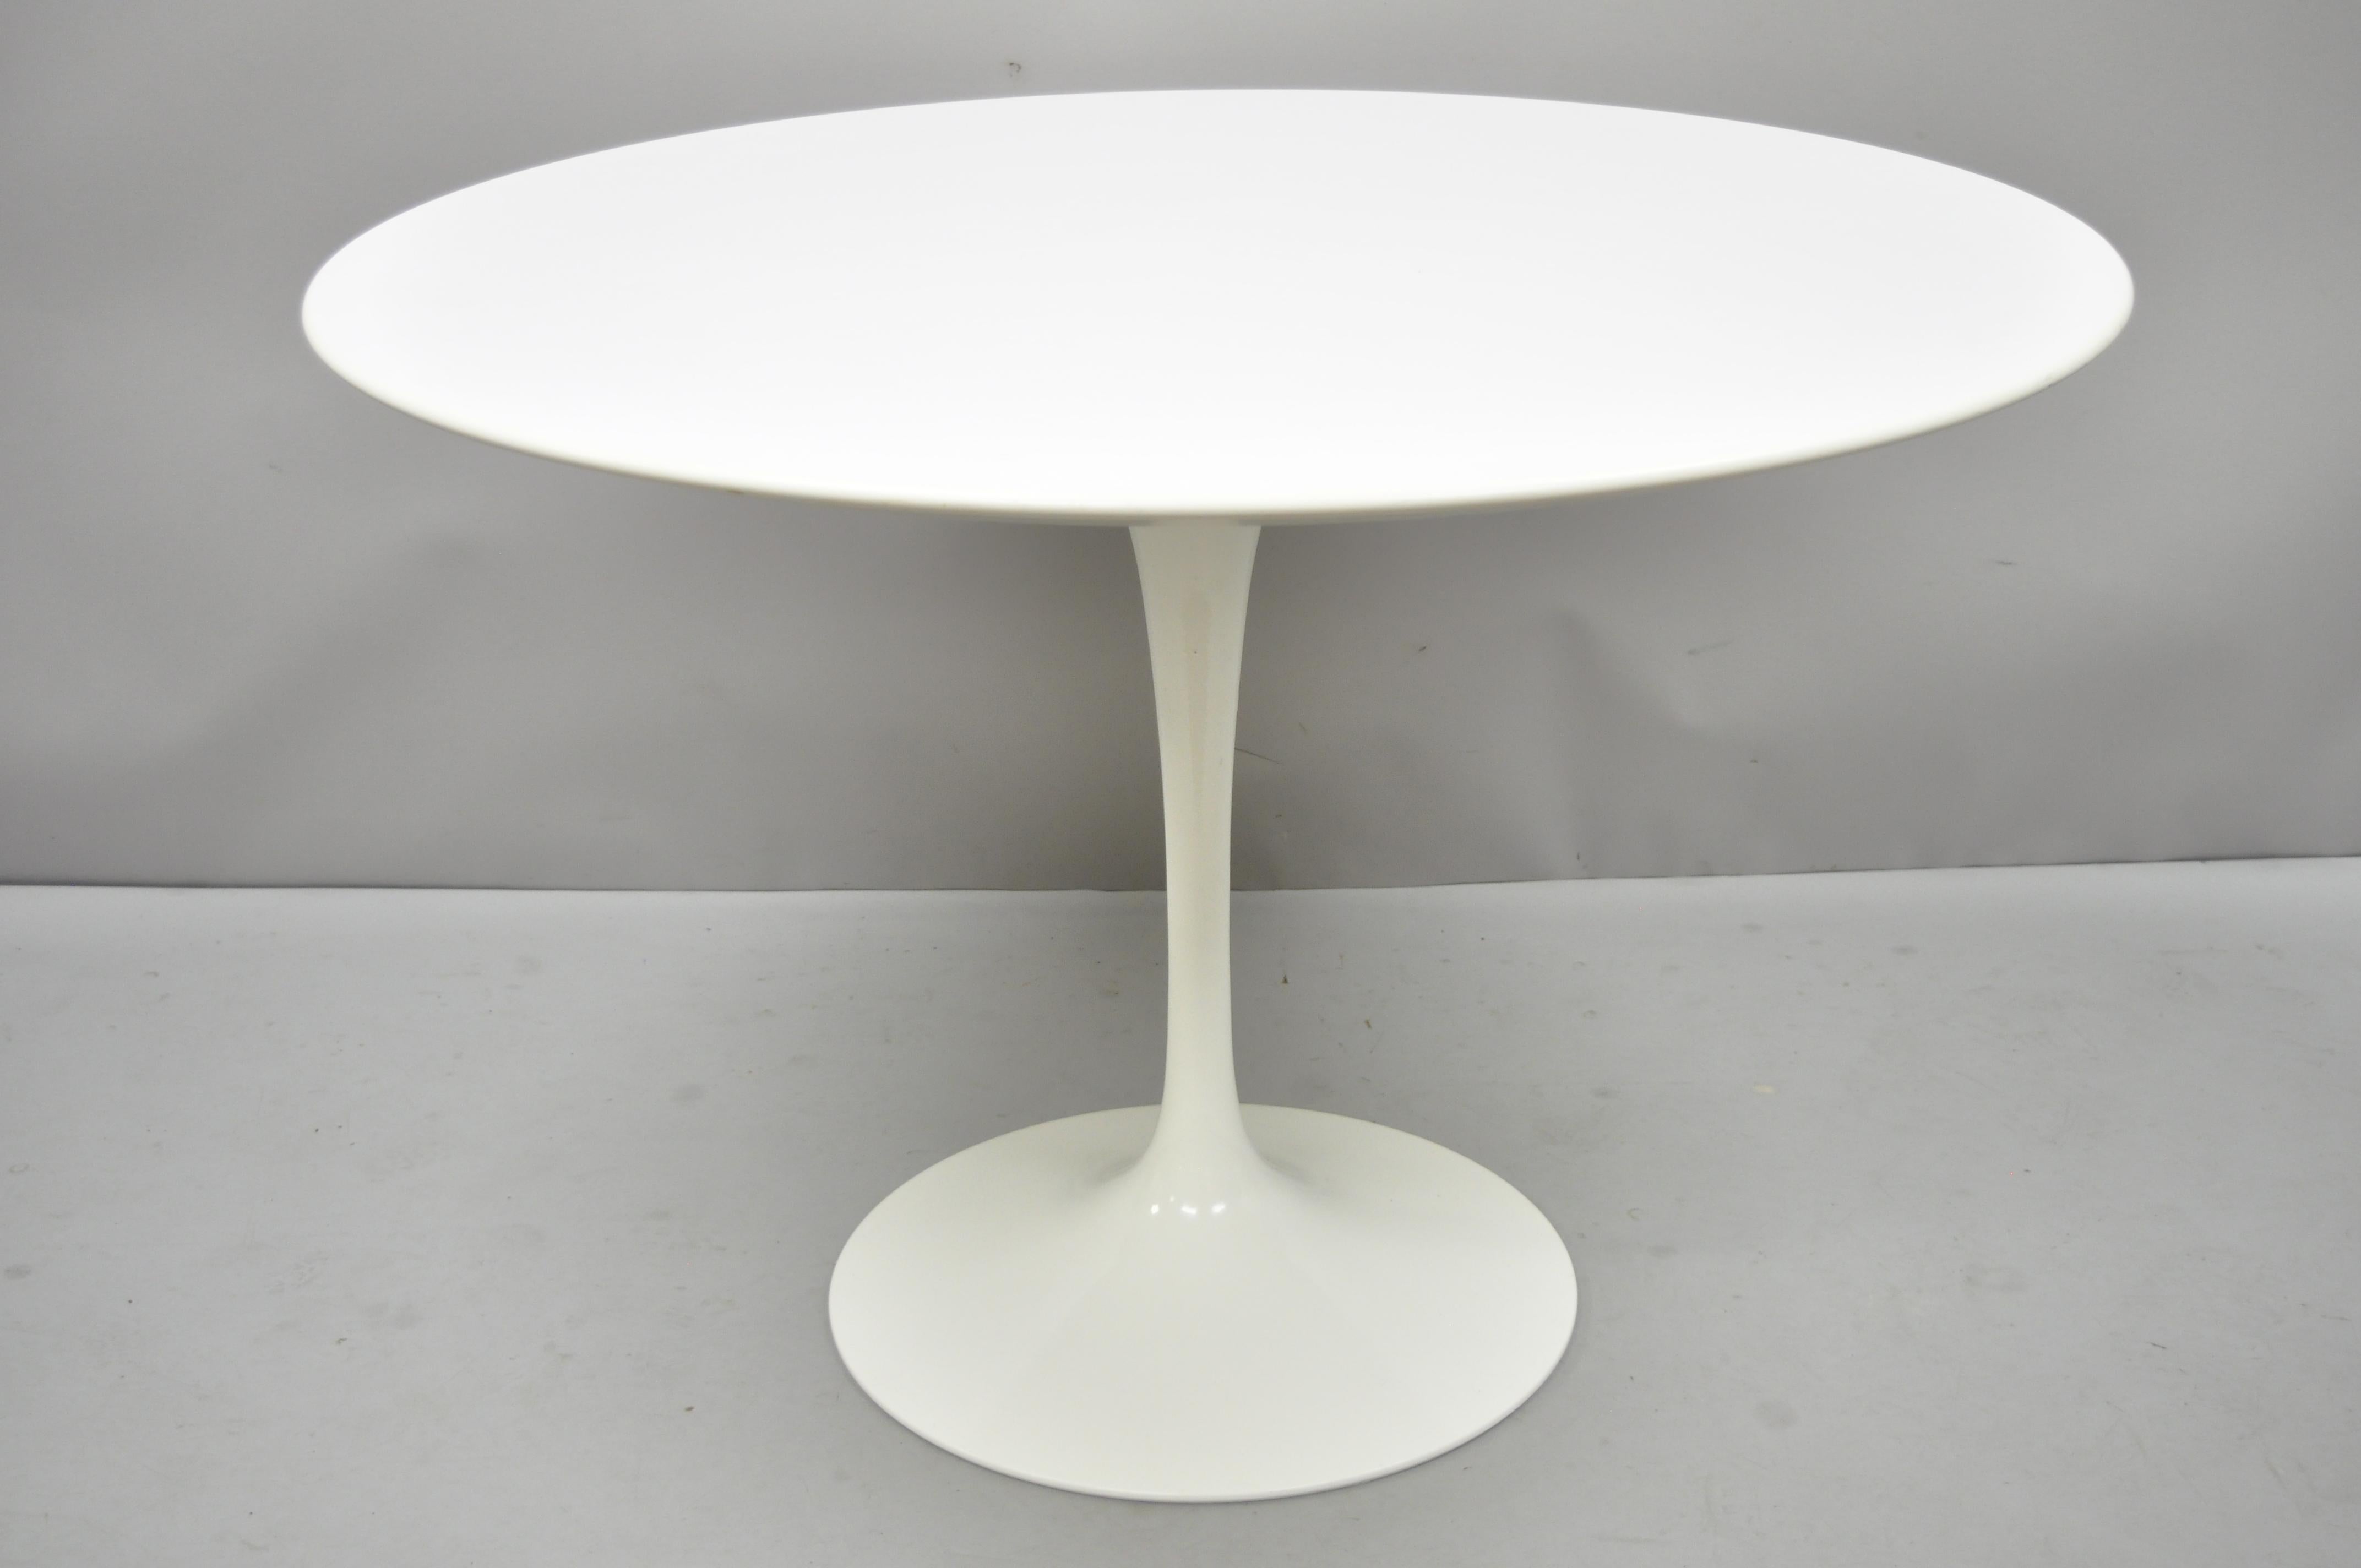 Metal Knoll Eero Saarinen Round White Laminate Top Dining Table Made in Italy